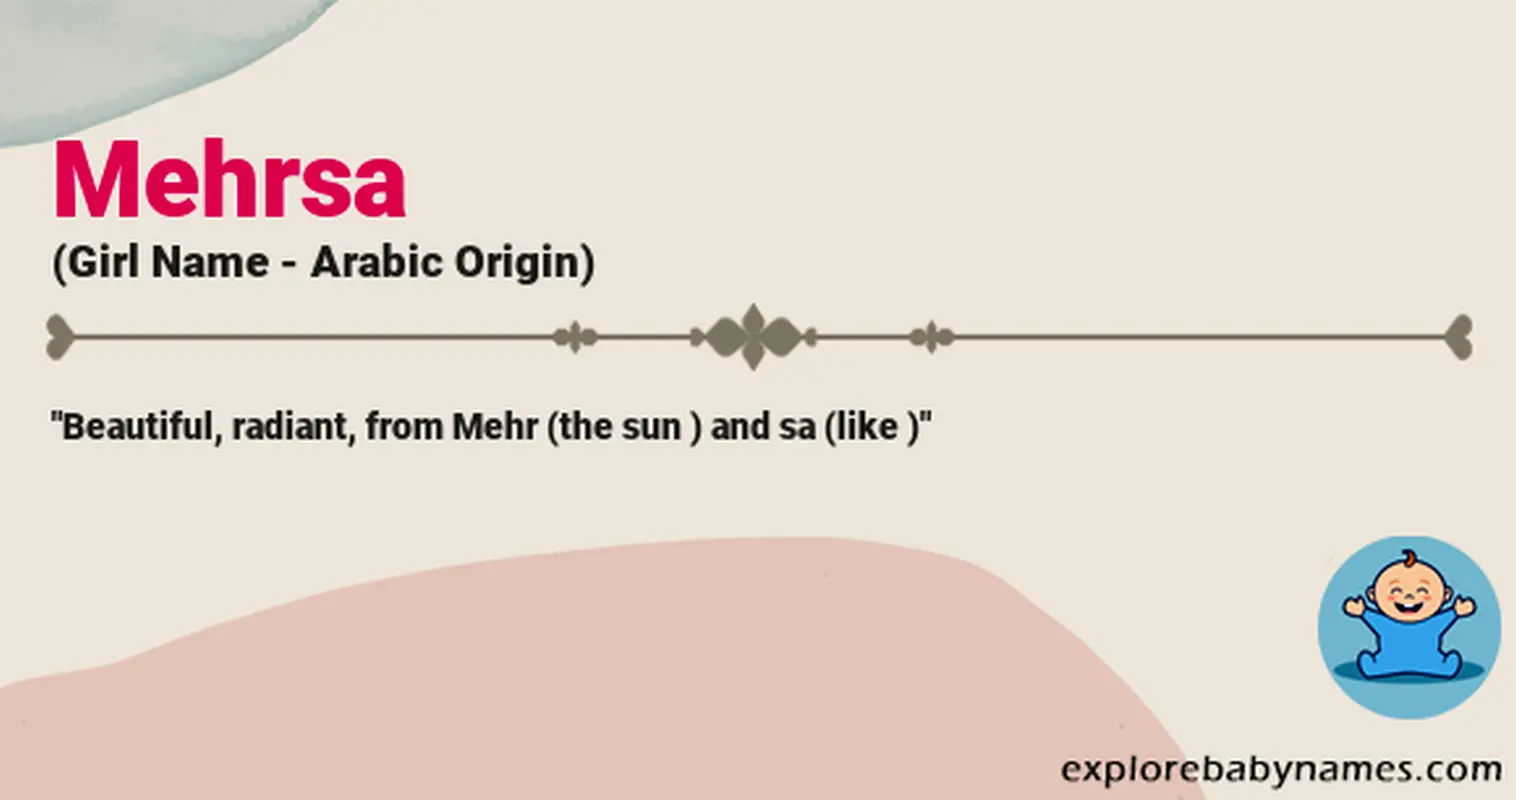 Meaning of Mehrsa